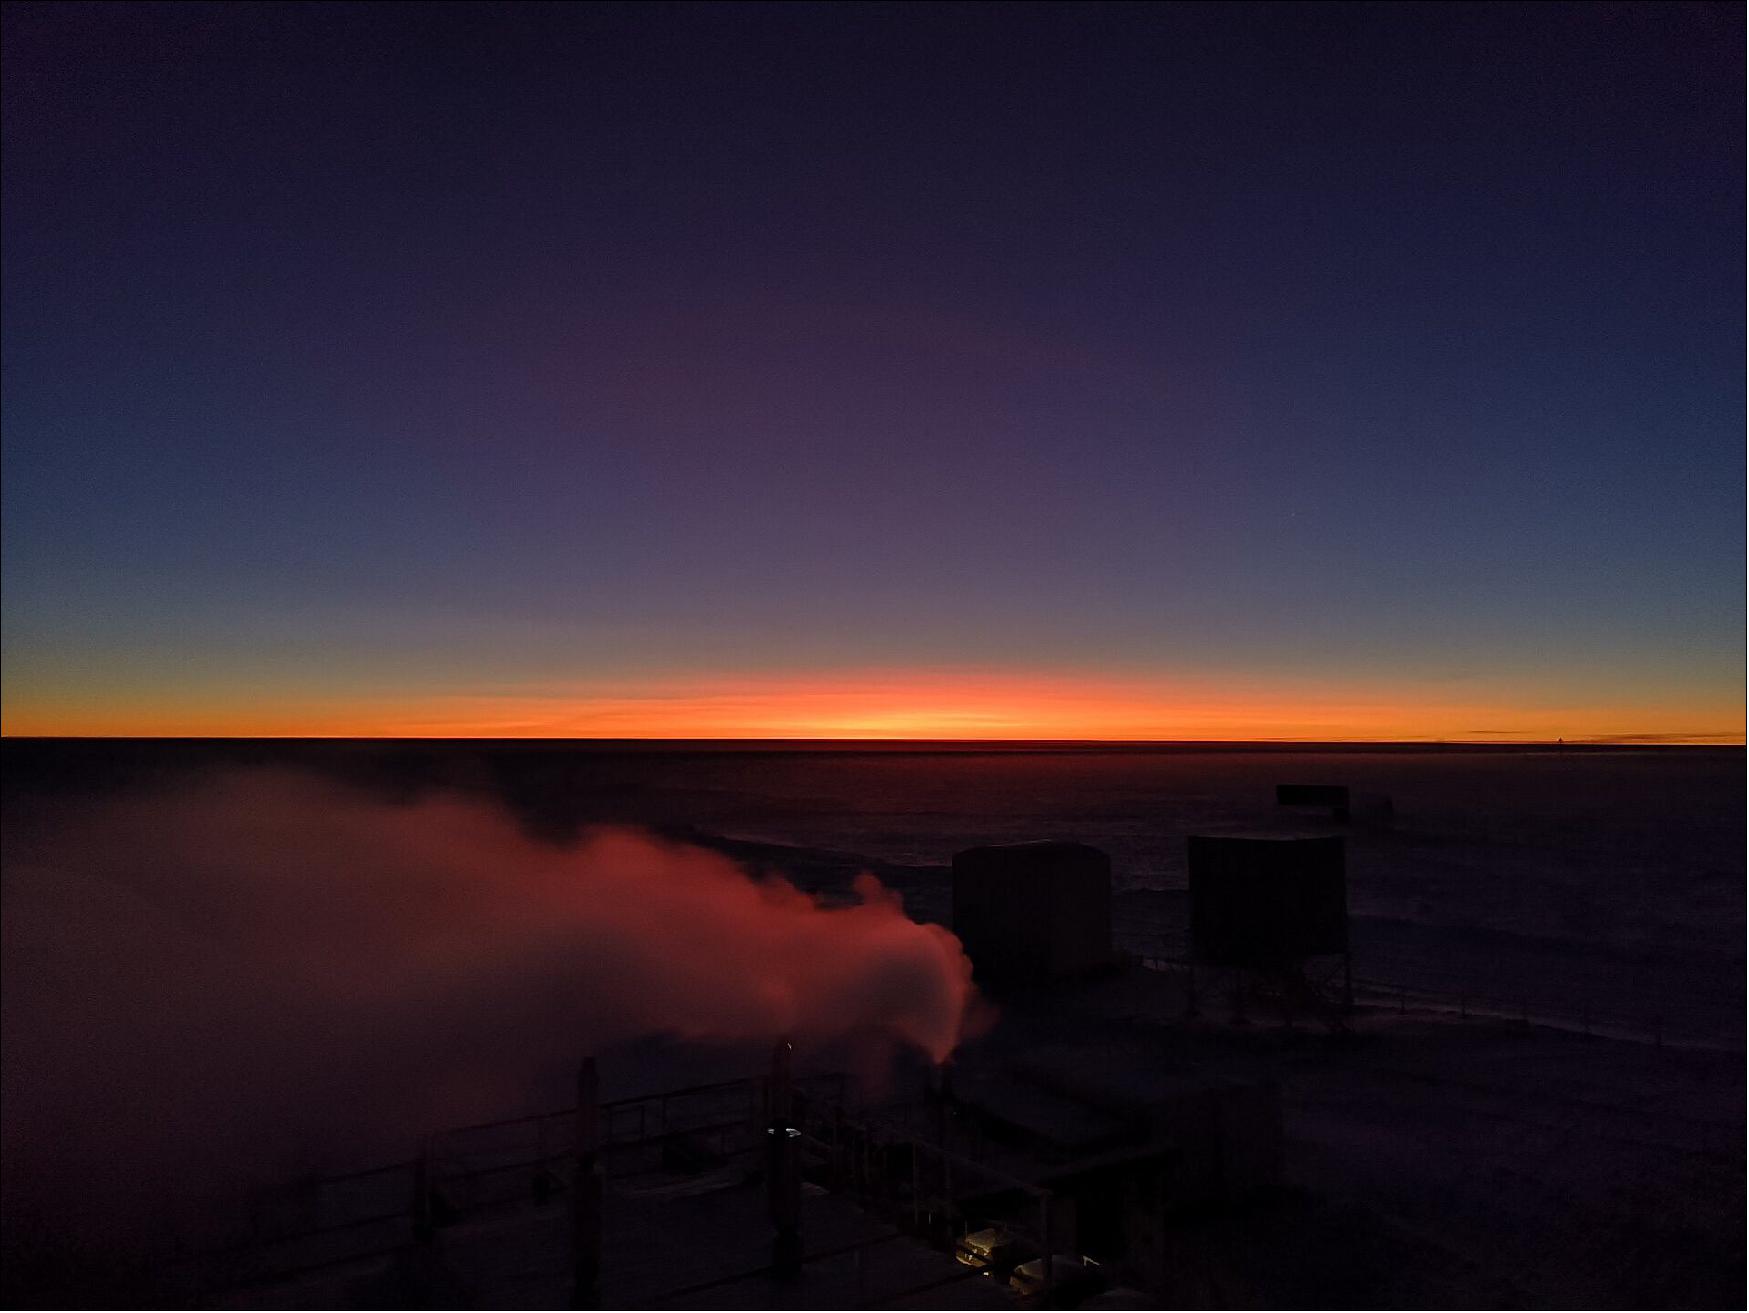 Figure 7: The 12-member crew at Concordia, located at the mountain plateau called Dome C, have spent the last few months in complete darkness: the sun disappeared in May and will not be fully visible again until mid-August. This image of high noon signals the beginning of the end of winter on the remote continent (image credit: ESA/IPEV/PNRA–N. Smith)